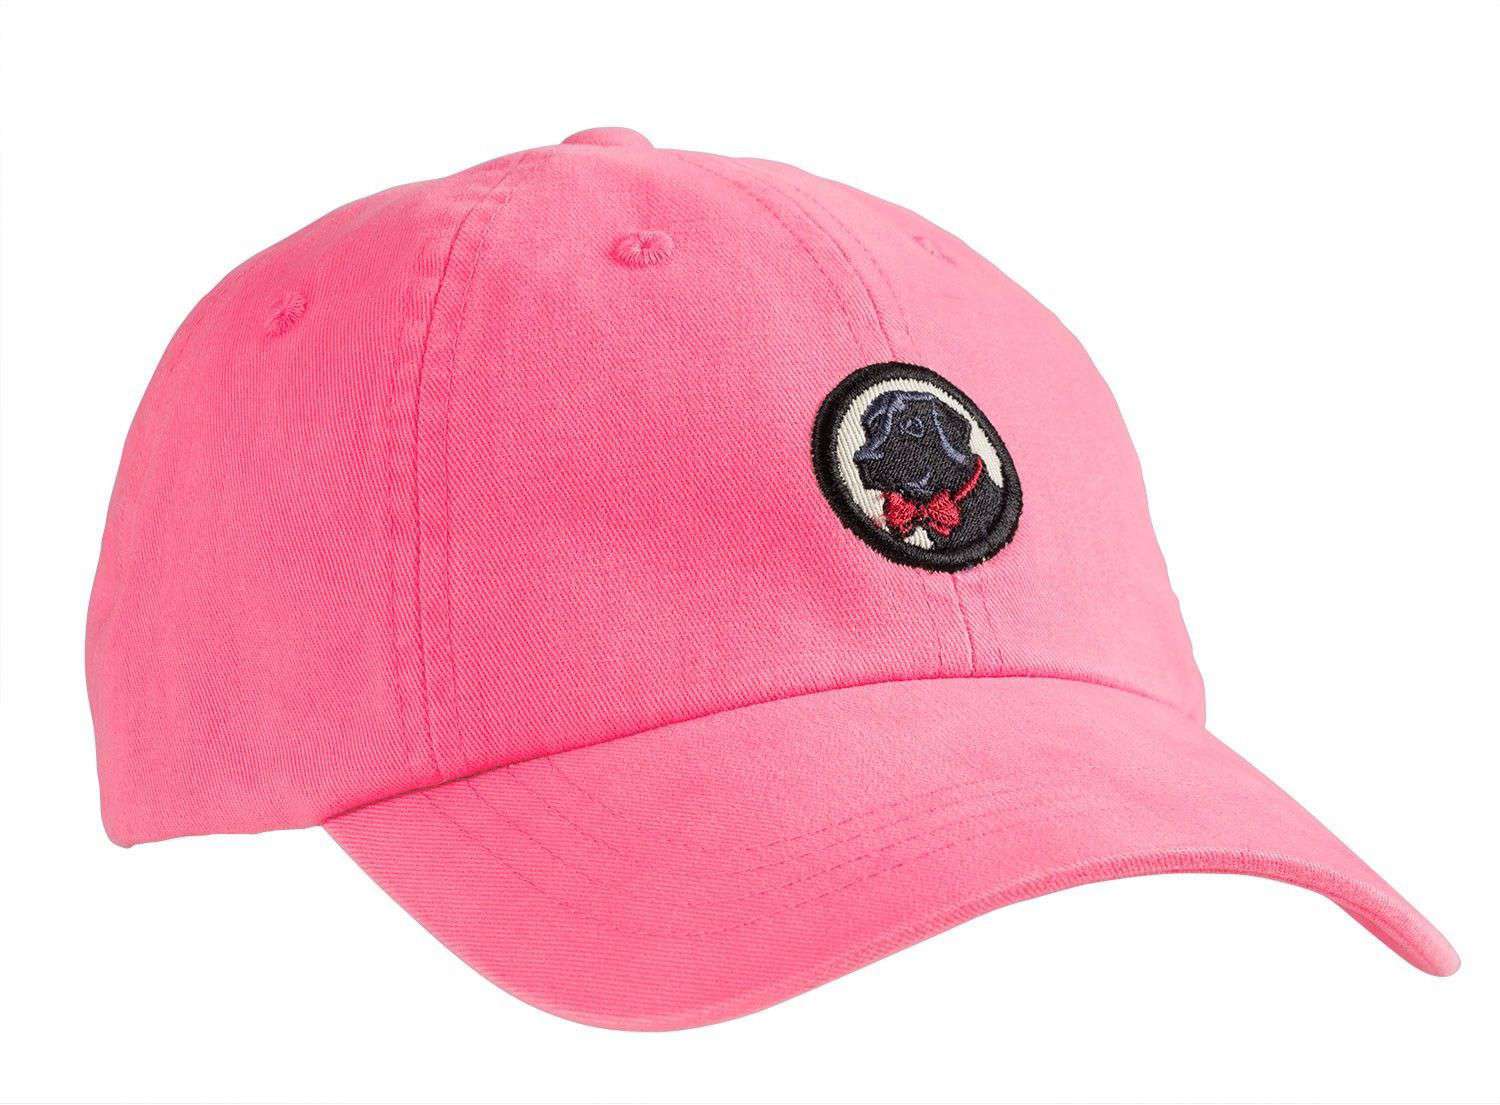 Frat Hat in Confetti Pink by Southern Proper - Country Club Prep